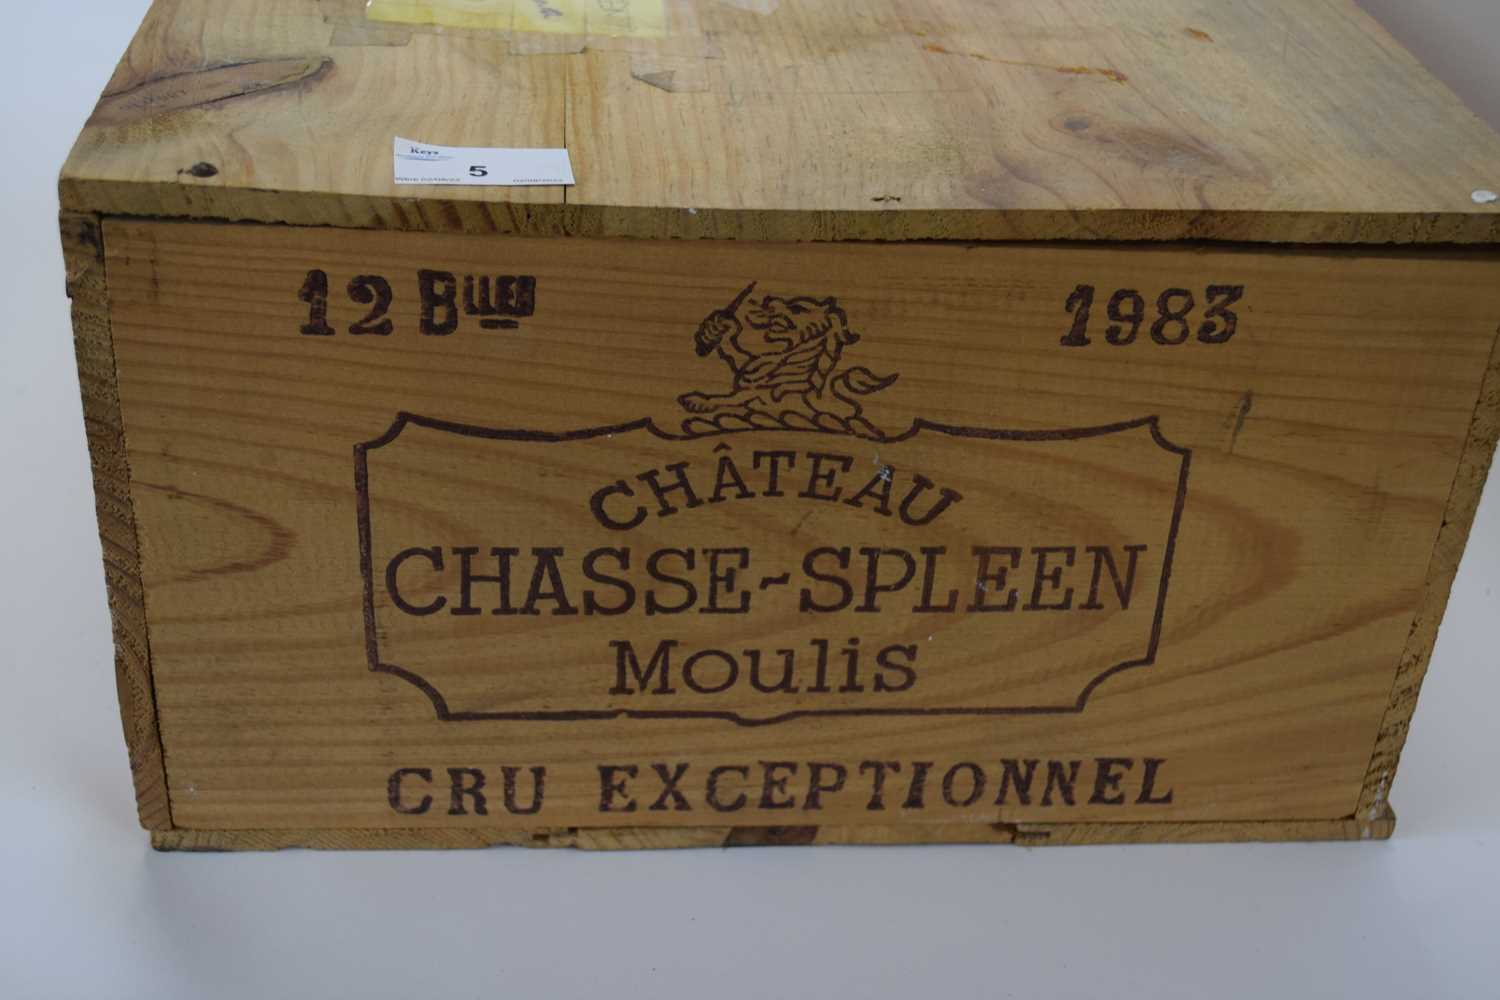 Twelve bottles Chateau Chasse-Spleen Moulis Cru Exceptionnel 1983 with original wooden case - Image 2 of 3